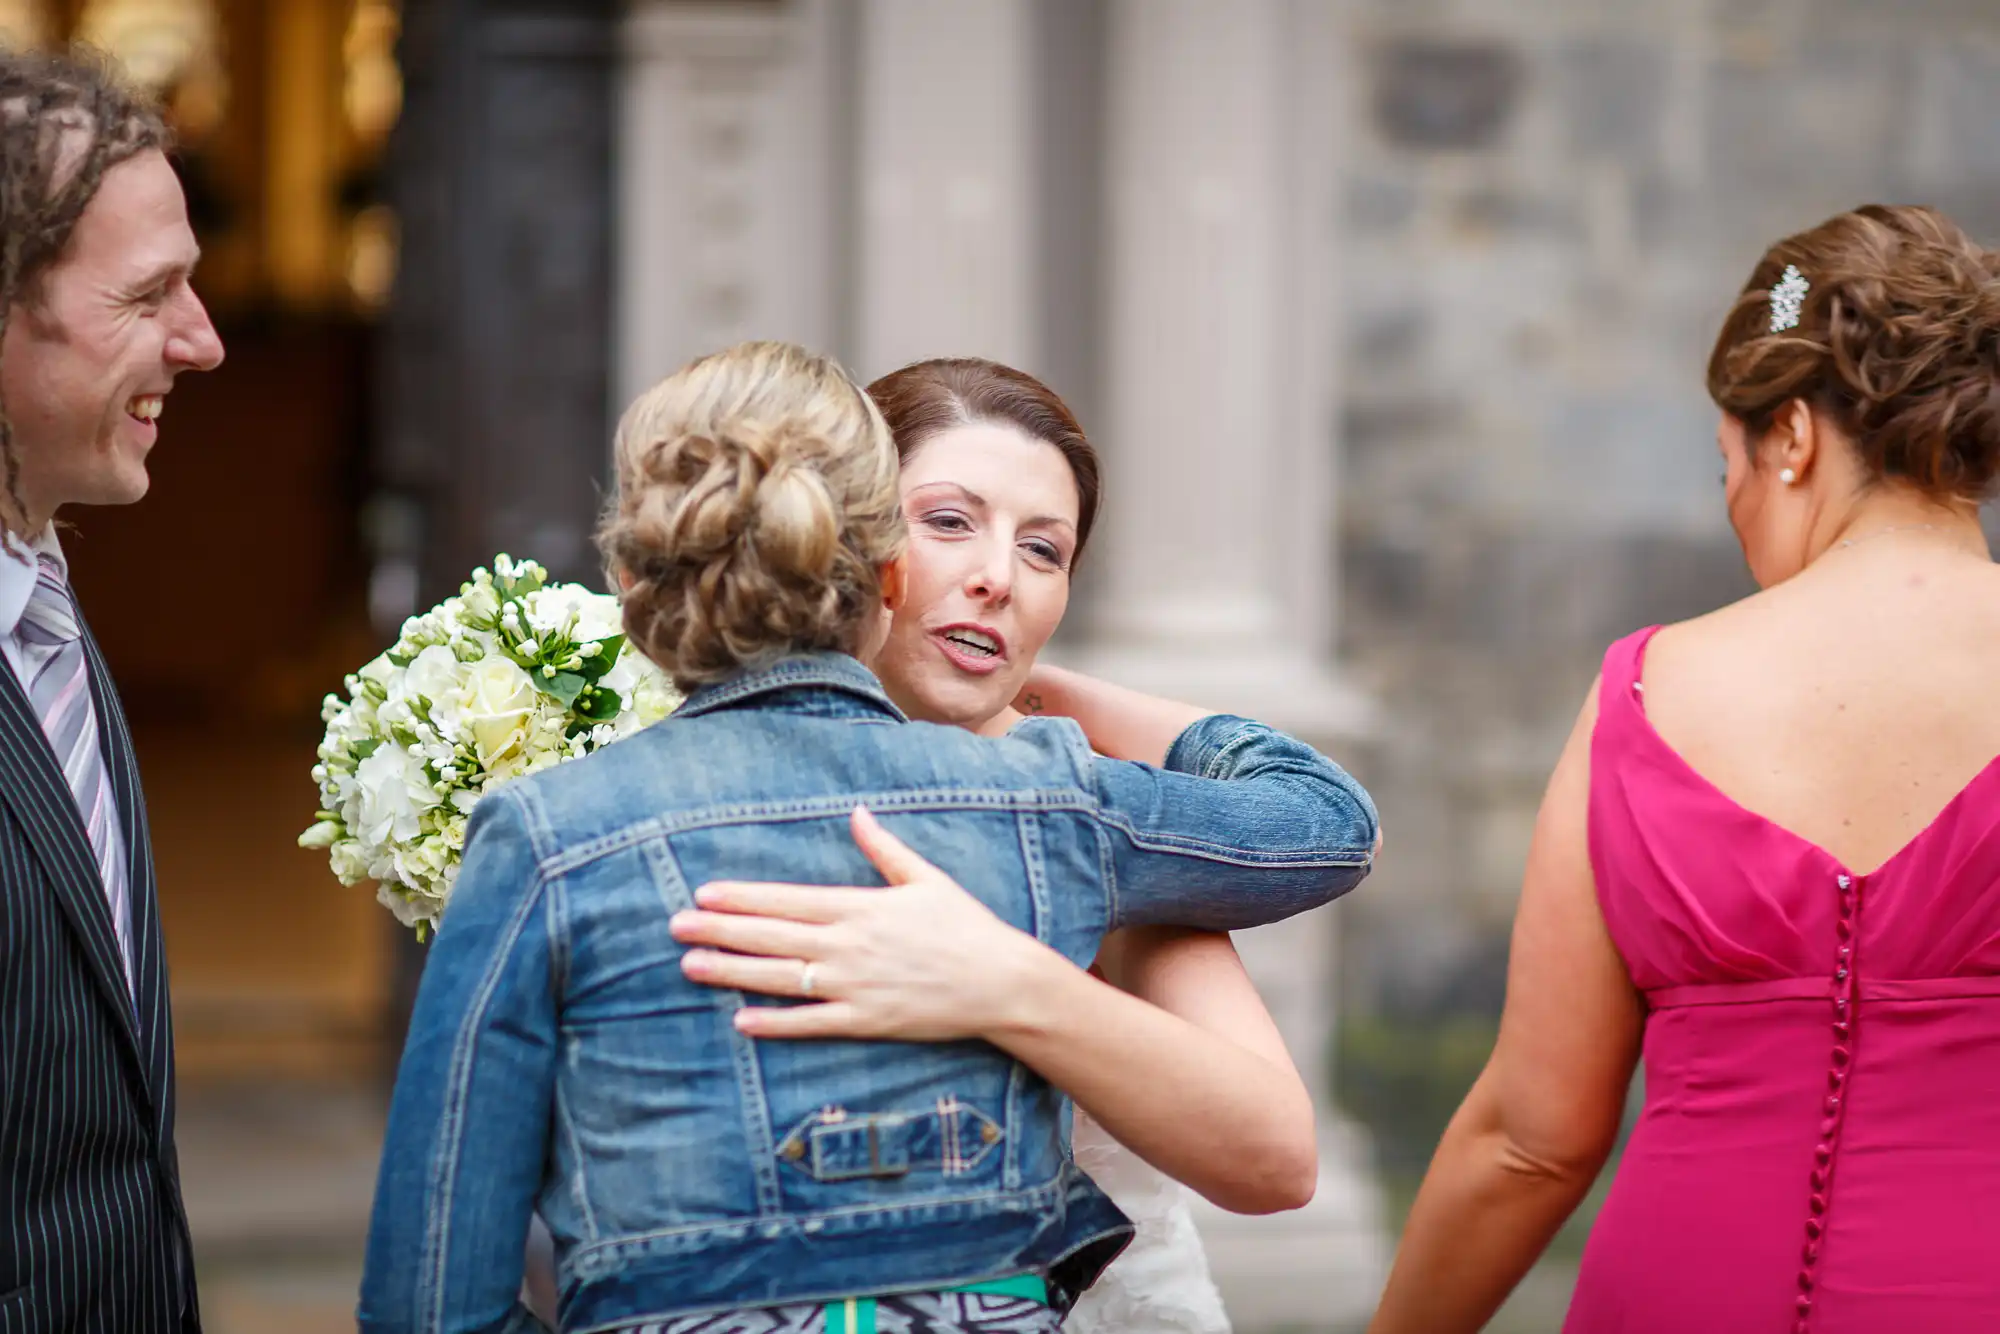 Bride in white dress embraces a woman in a denim jacket, holding a bouquet, while conversing with a smiling man and another woman in pink.